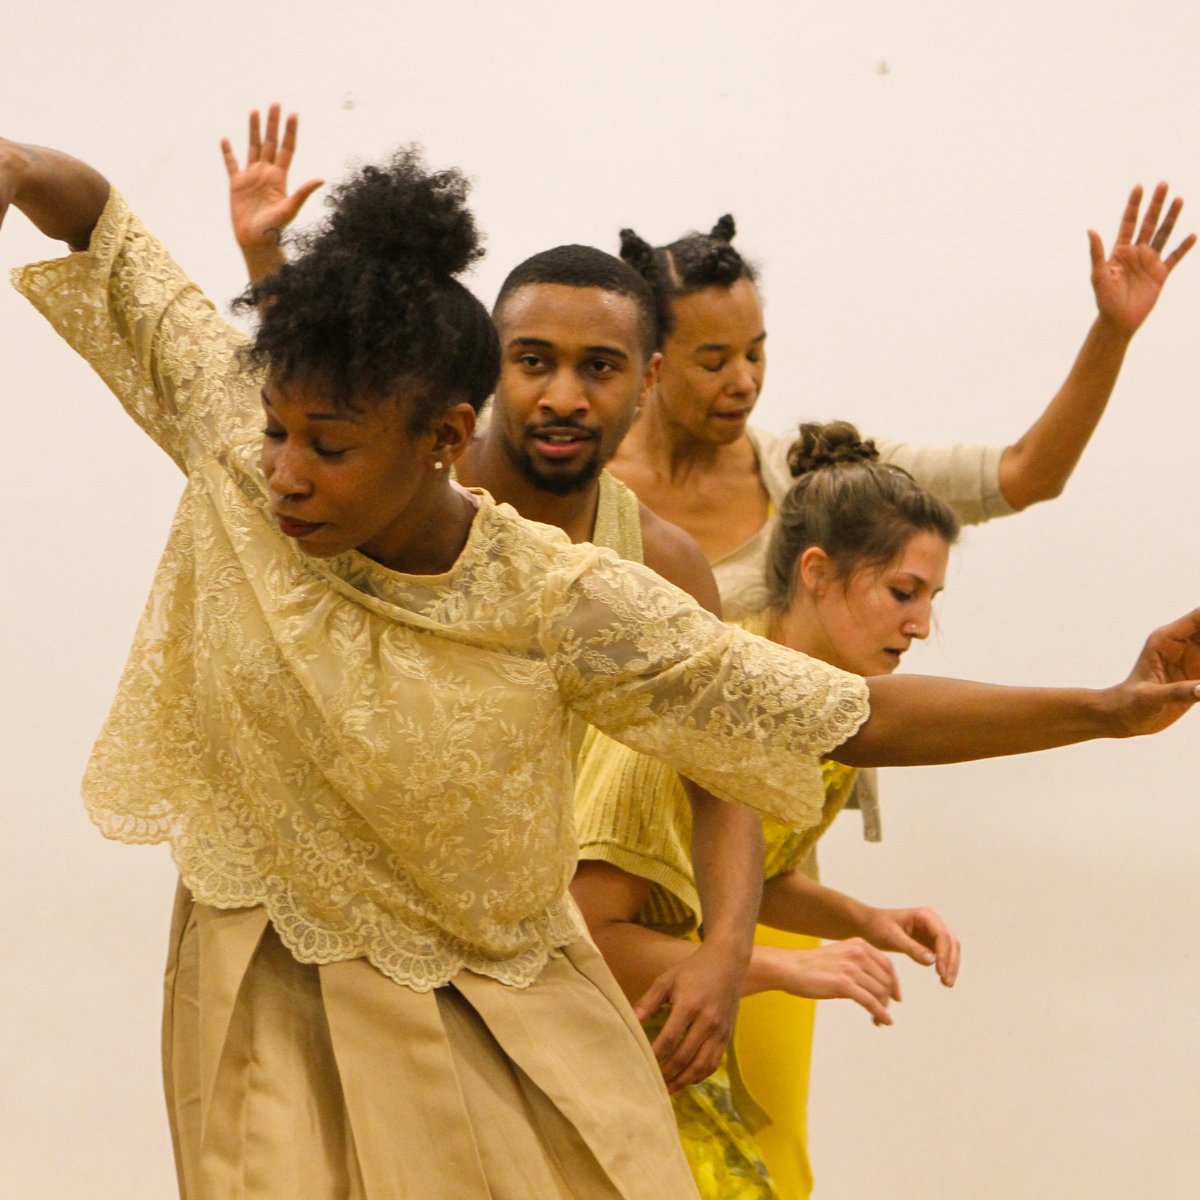 Create, take risks, and dance! During the week leading up to DELIRIOUS Dances/ Edisa Weeks' performance 3 RITES: Liberty, there will be a #dance #workshop, Precision & Abandonment, on Wed, April 24, 9:00am - 10:15am. Co-presented with PearlArts. #theater bit.ly/3U5y4gh